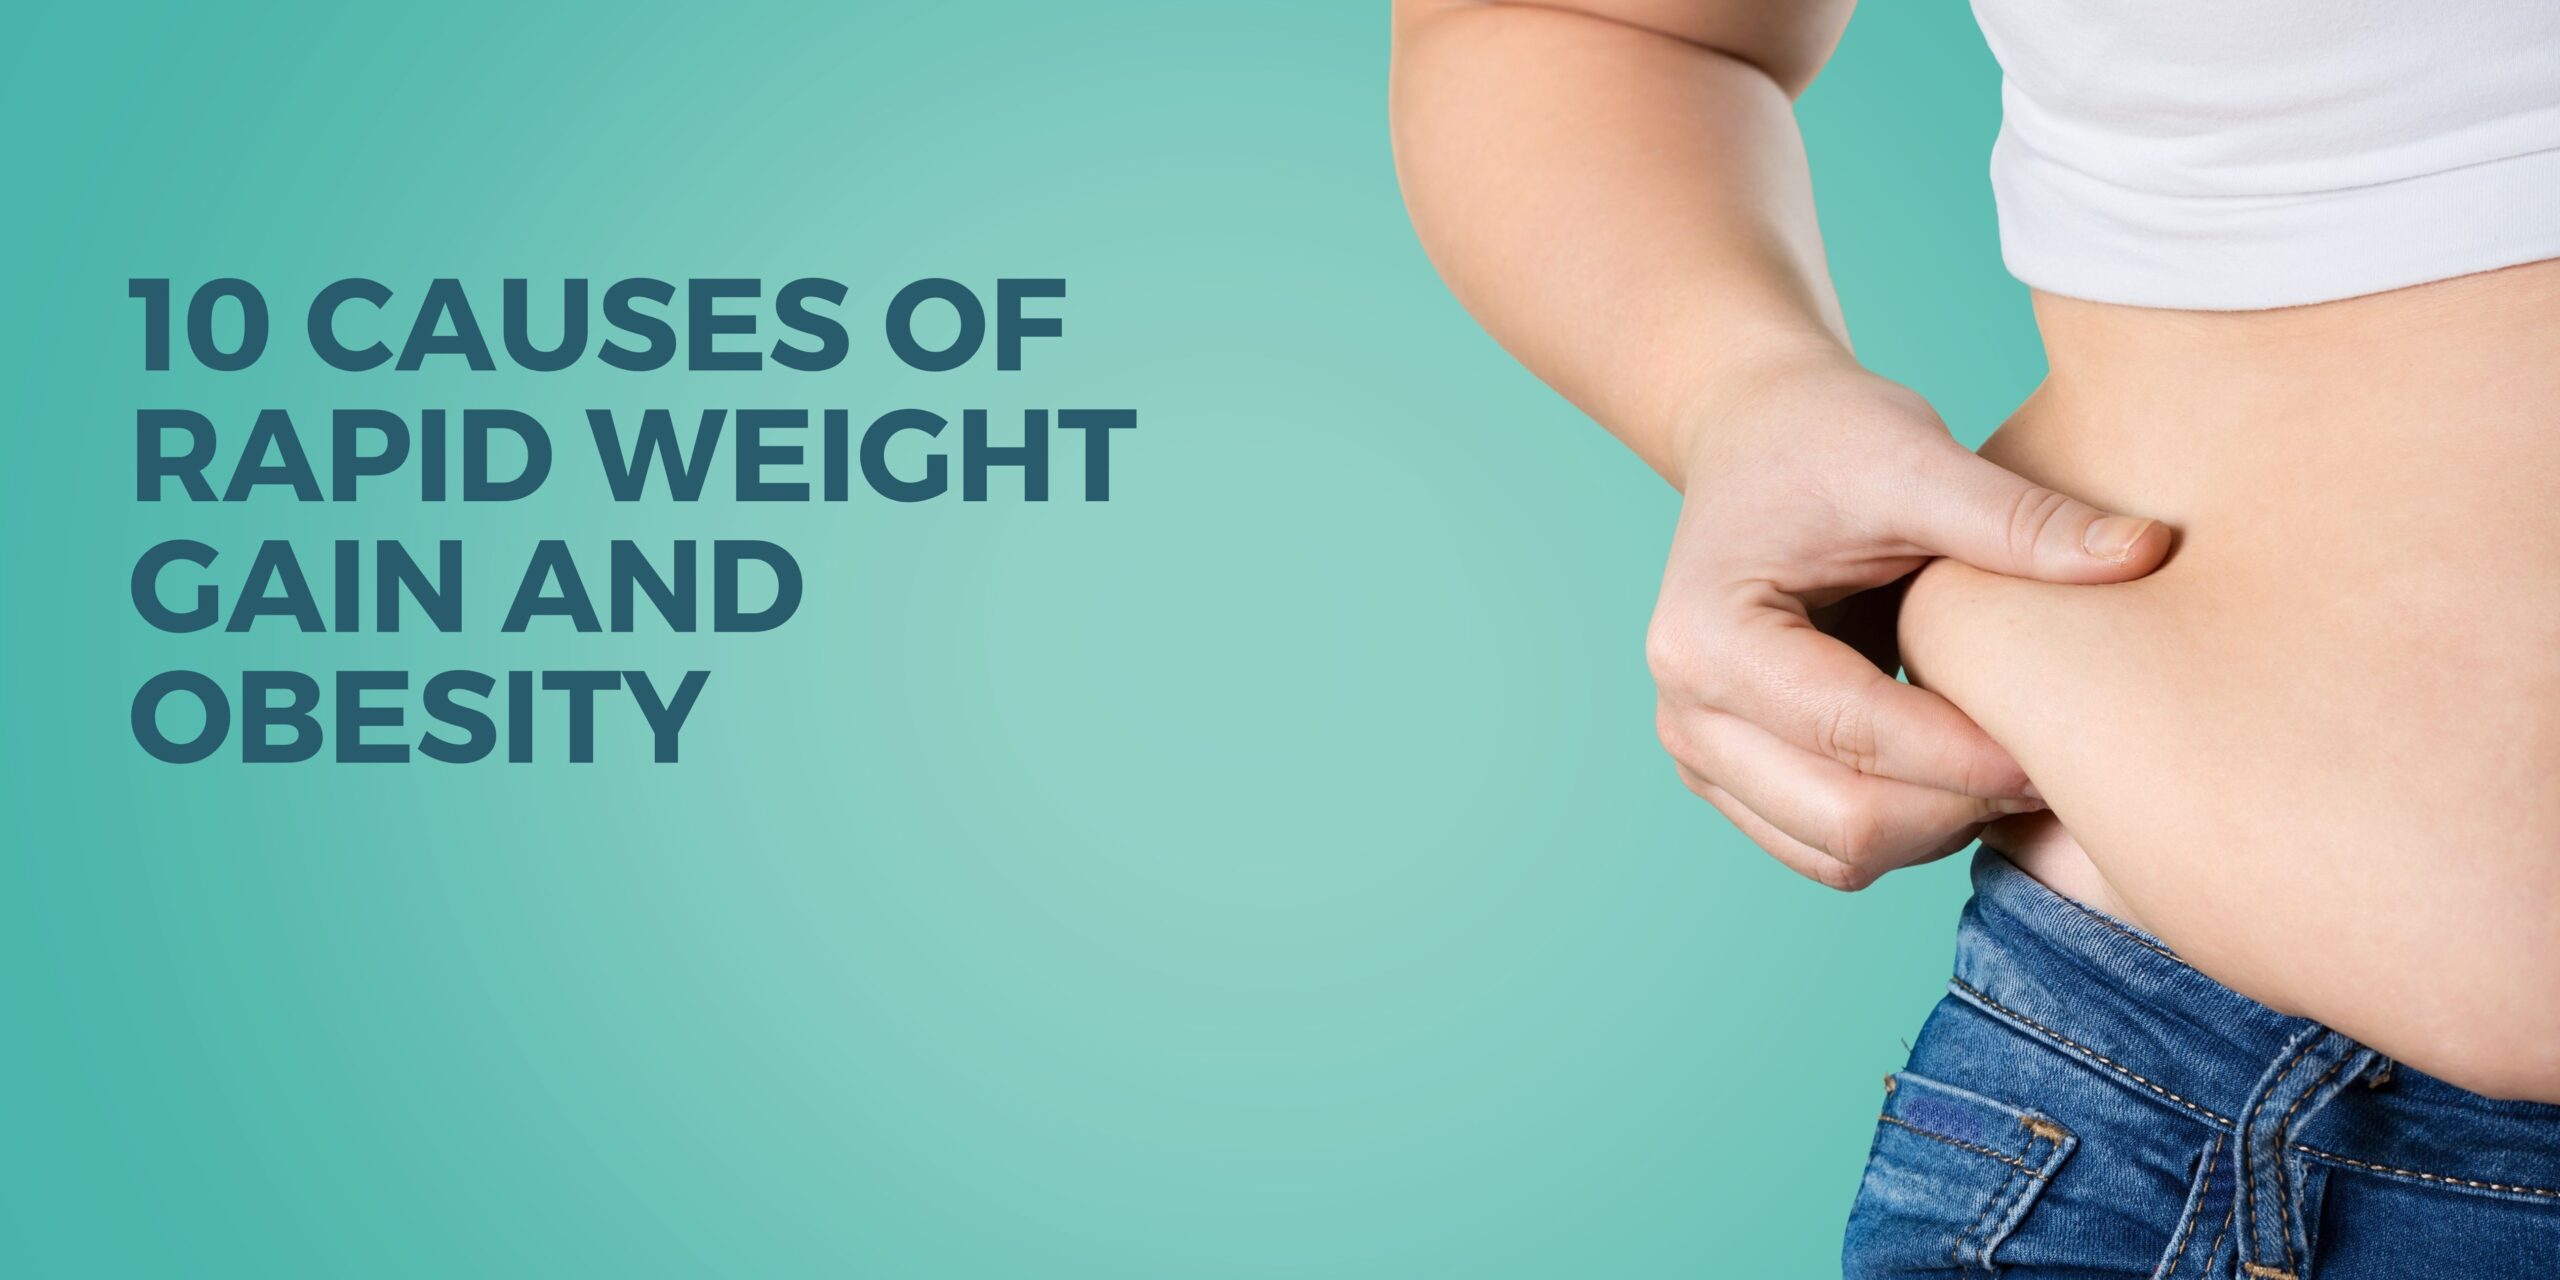 10 Causes of Rapid Weight Gain and Obesity